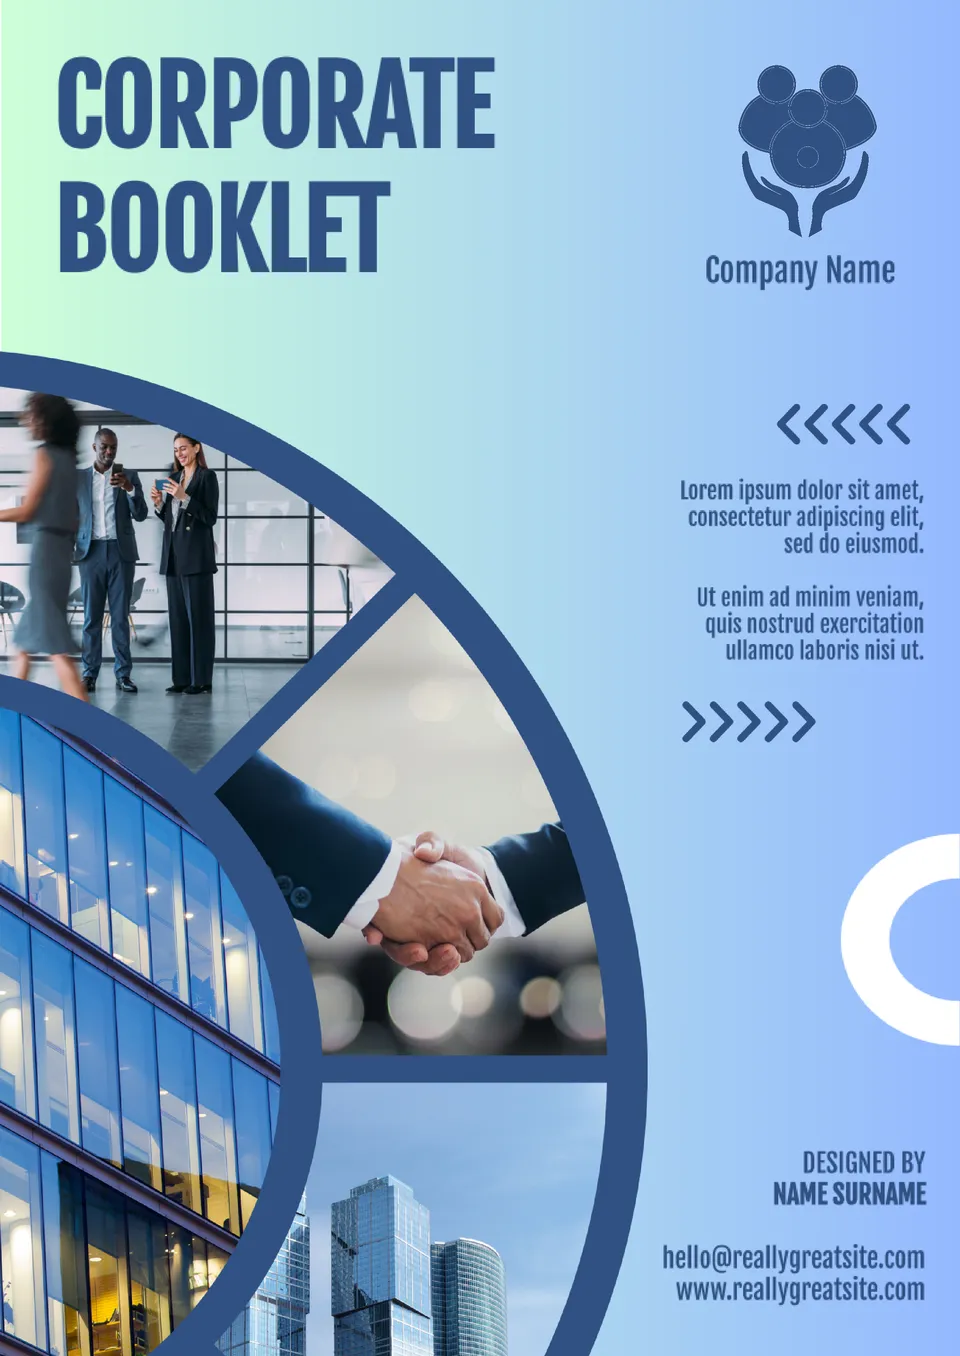 Corporate Booklet Template